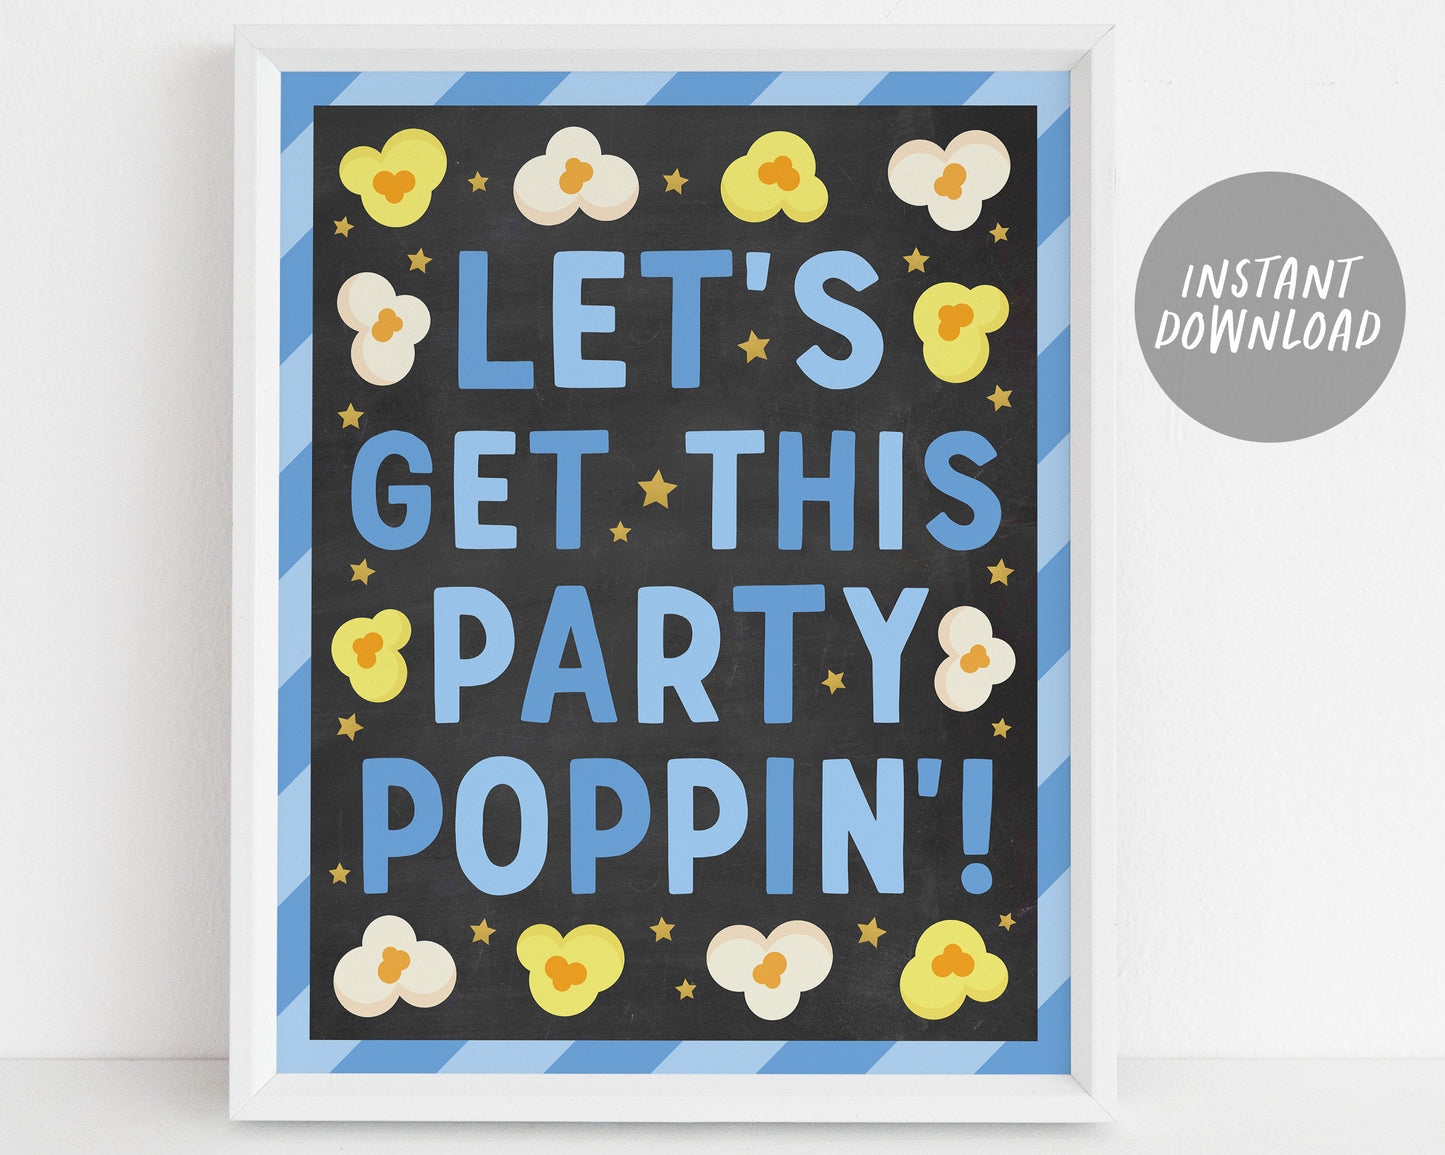 Pizza Popcorn and Pajamas Party Signs BUNDLE For Birthday, Popcorn Bar Sign Toppings Chalkboard Pizzeria Slumber Sleepover Party Favors Sign